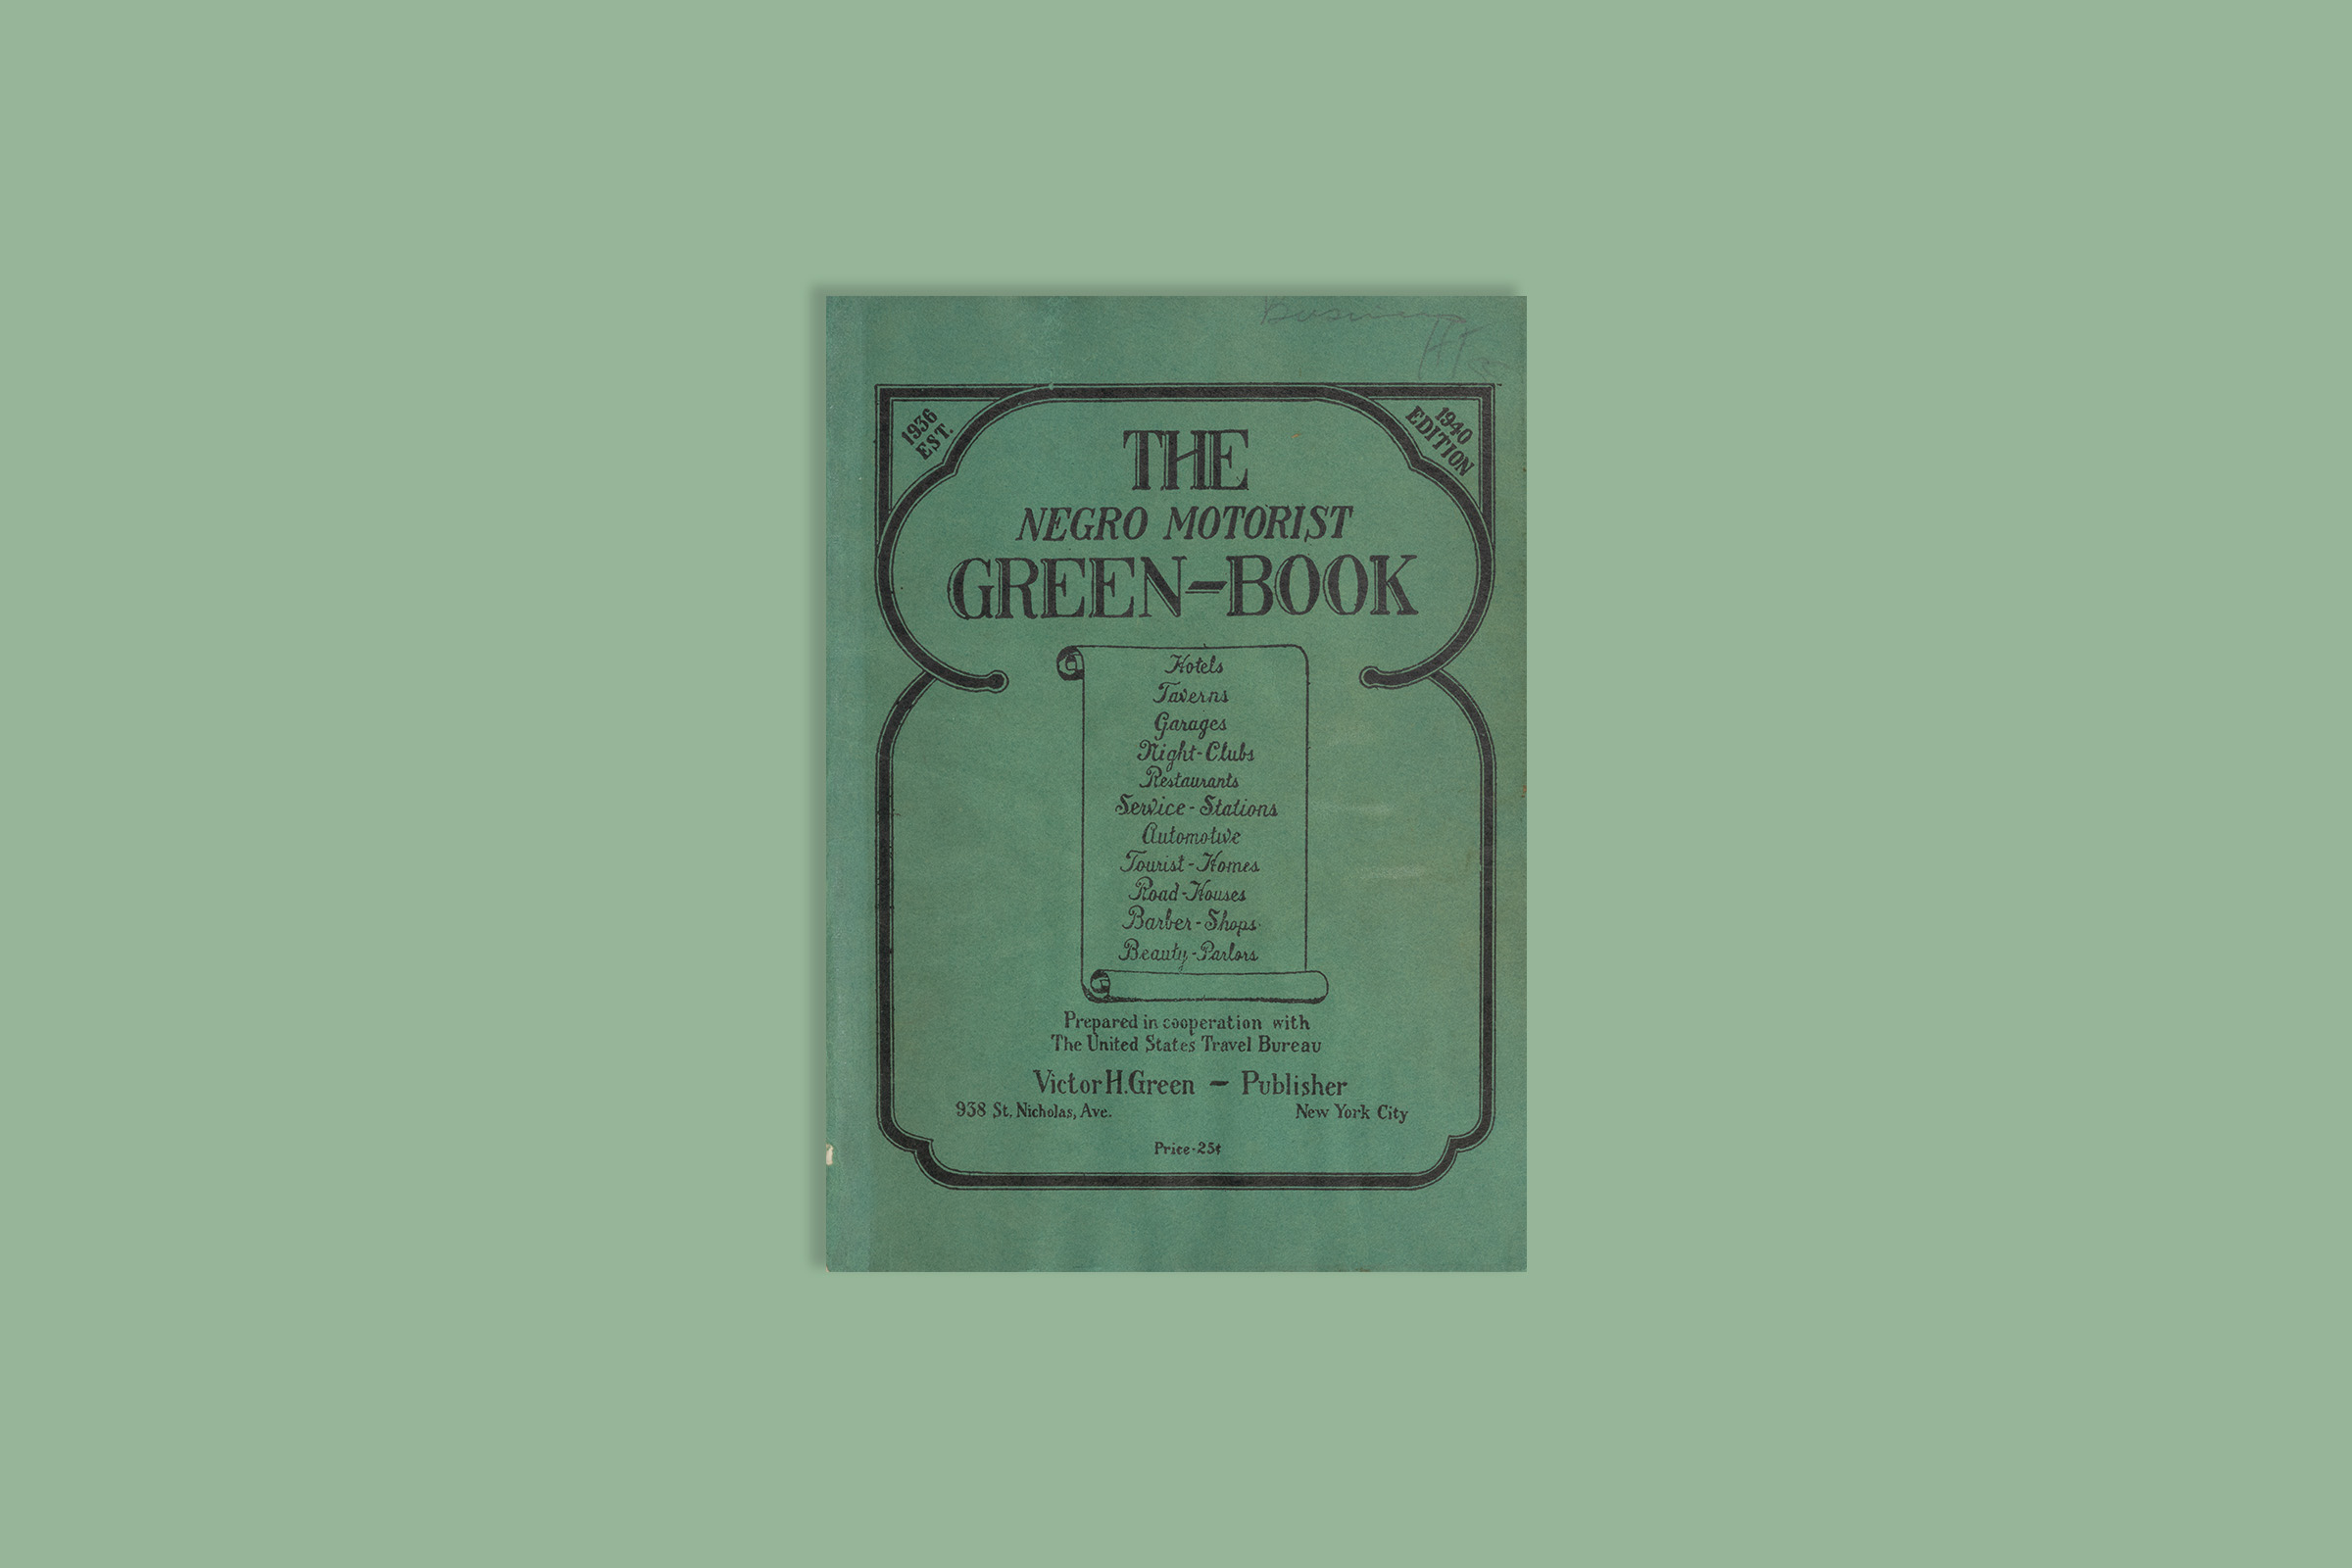 Cover of the book "The Negro Motorist Green-Book"